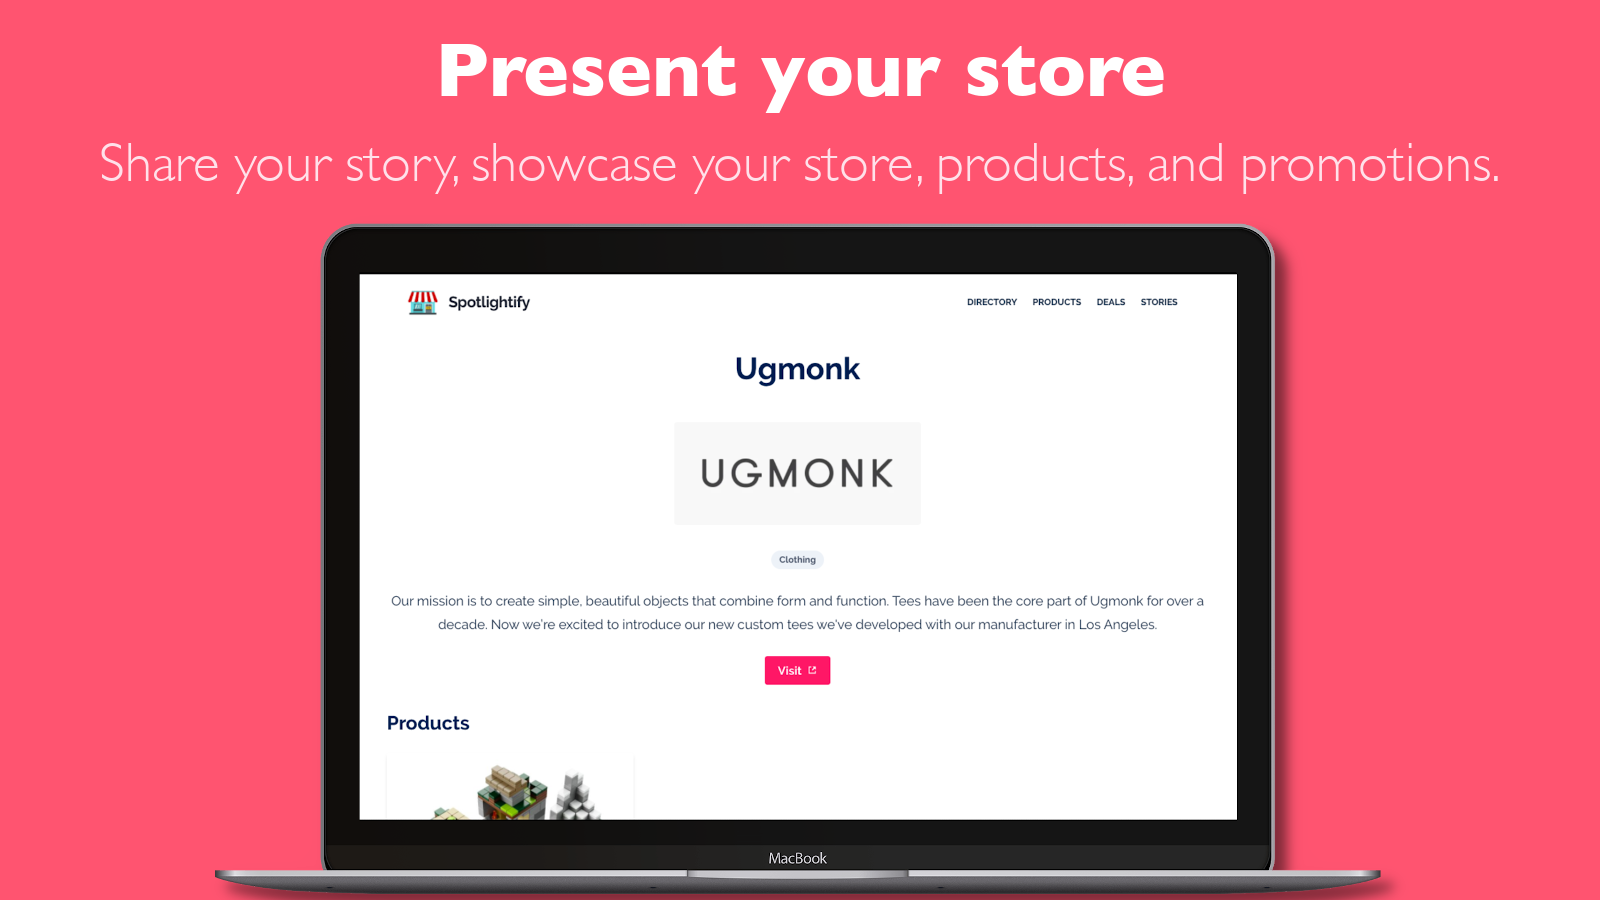 Share your story, present your store, products, and promotions.